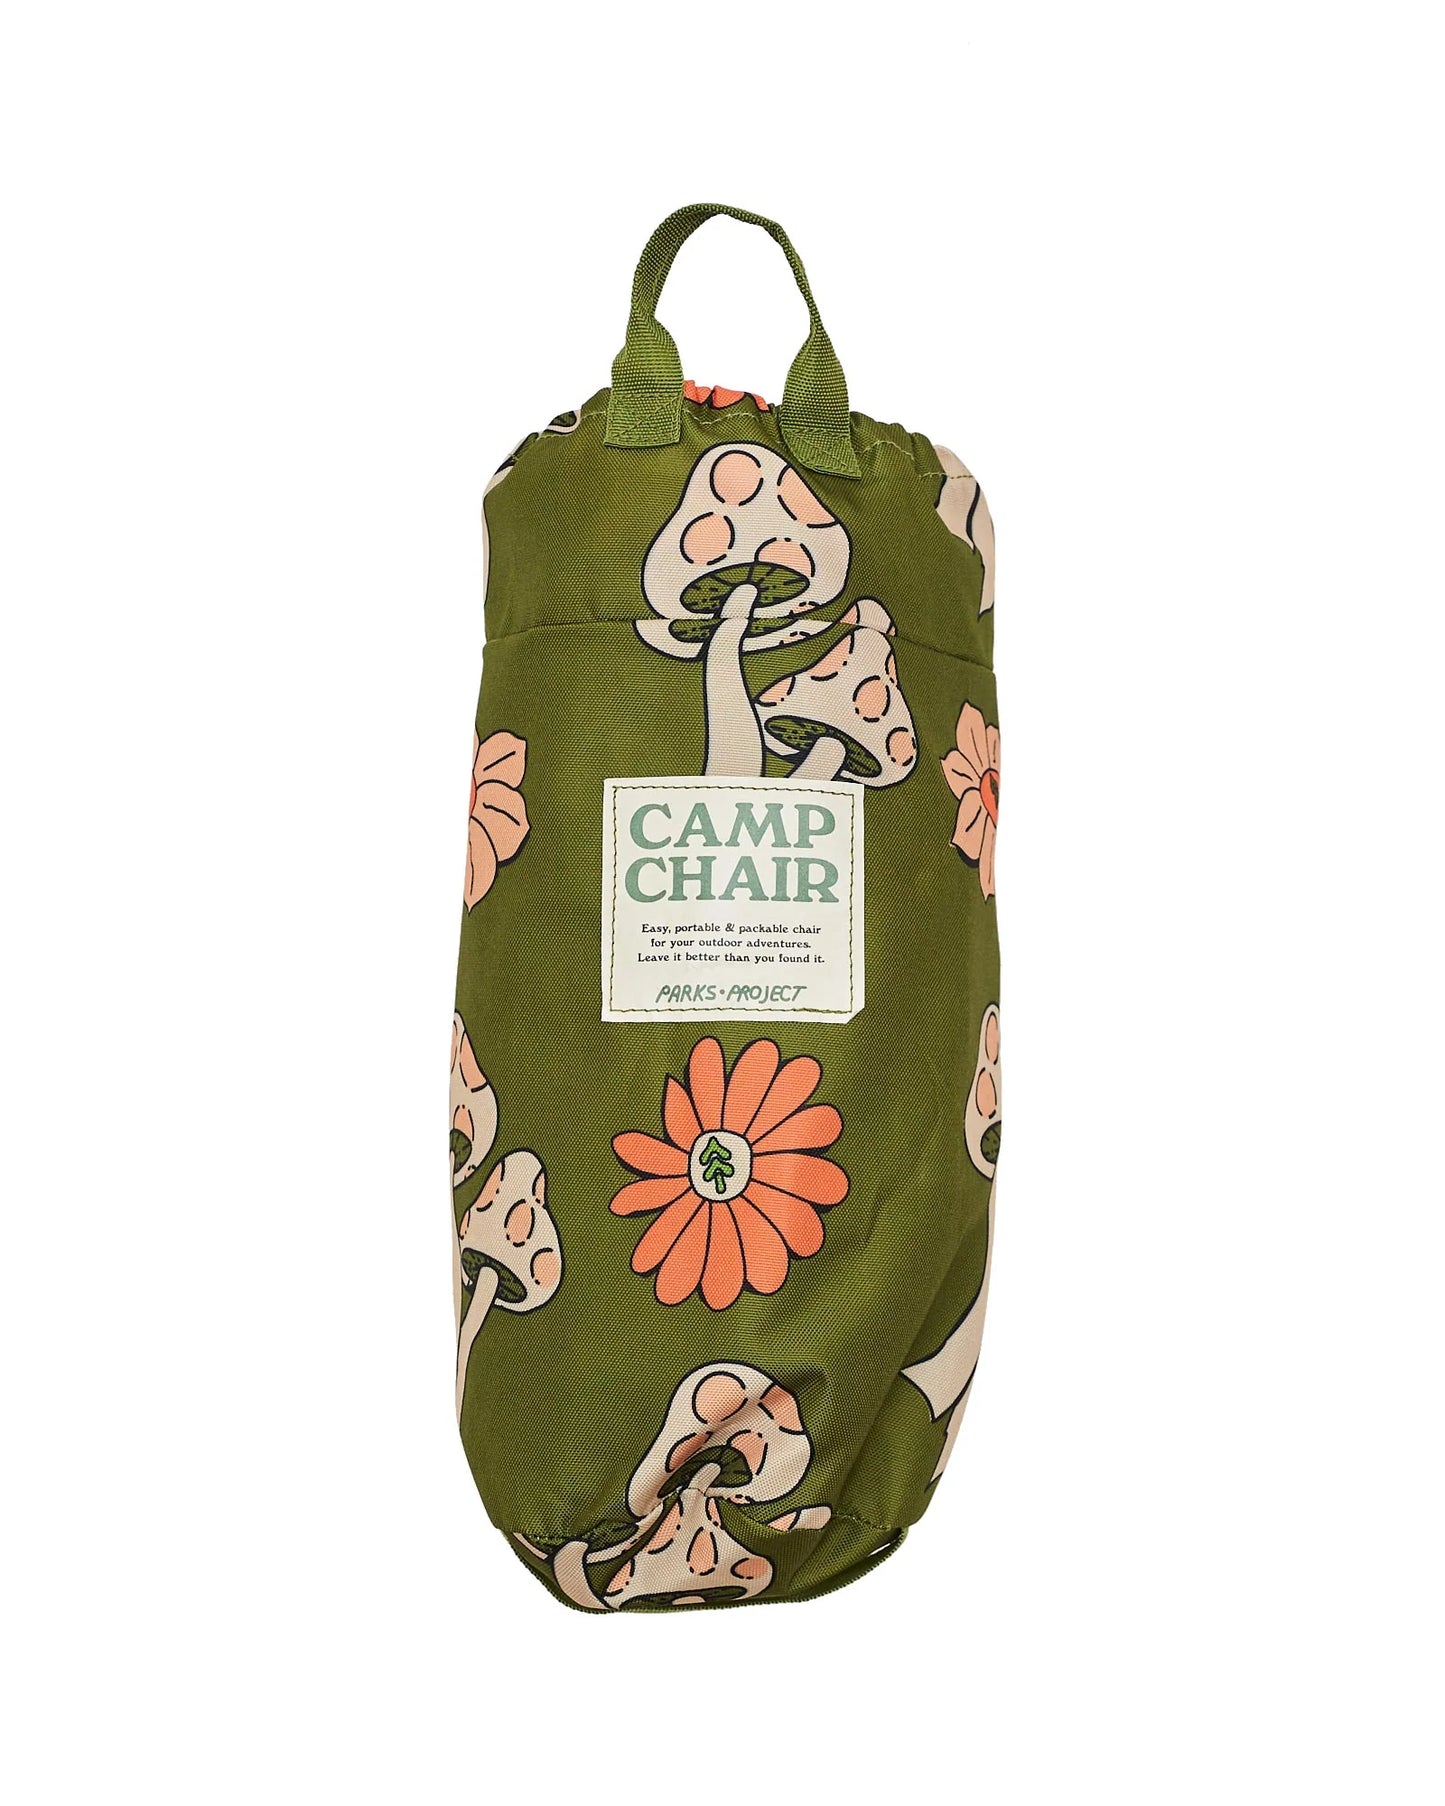 SHROOMS packable camp chair